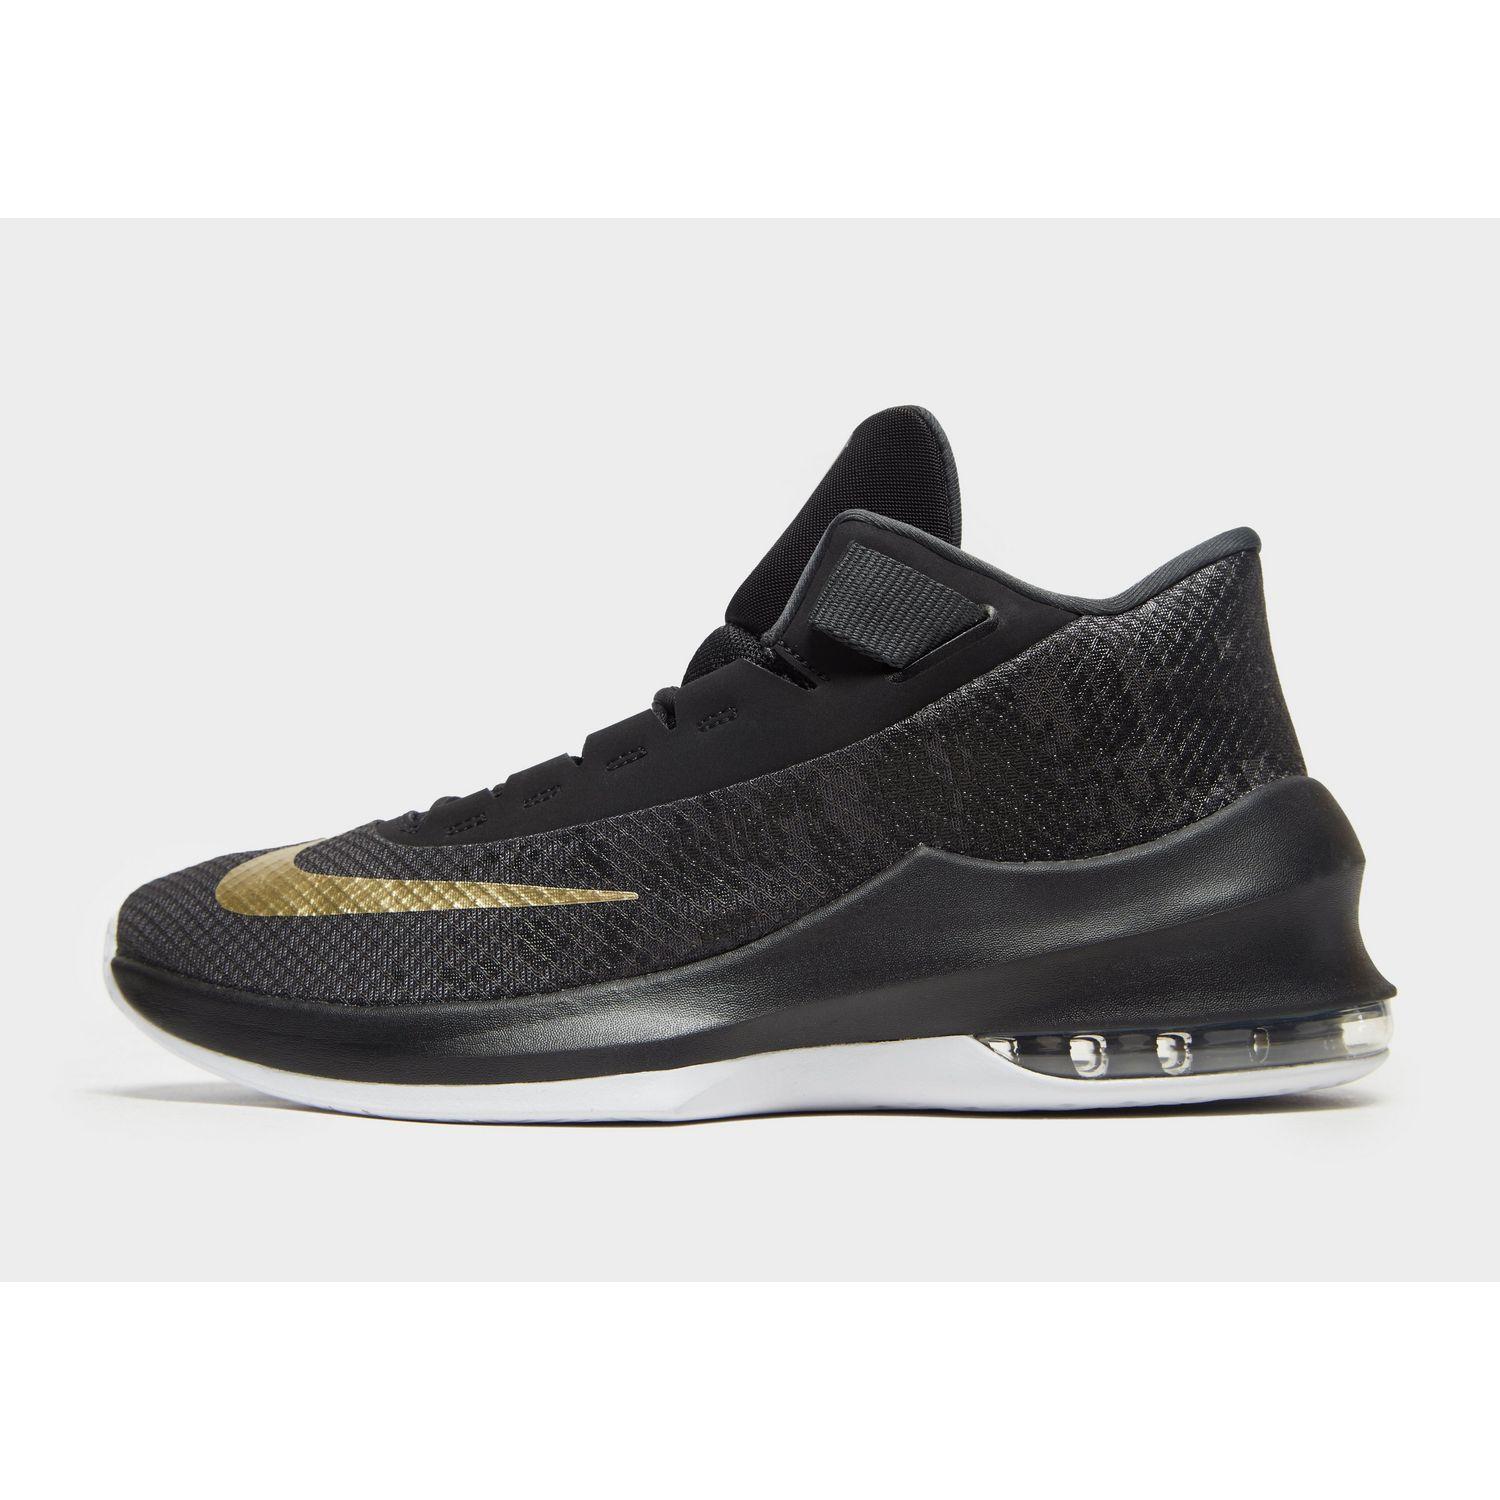 Nike Synthetic Air Max Infuriate Ii in Black/Gold (Black) for Men - Lyst